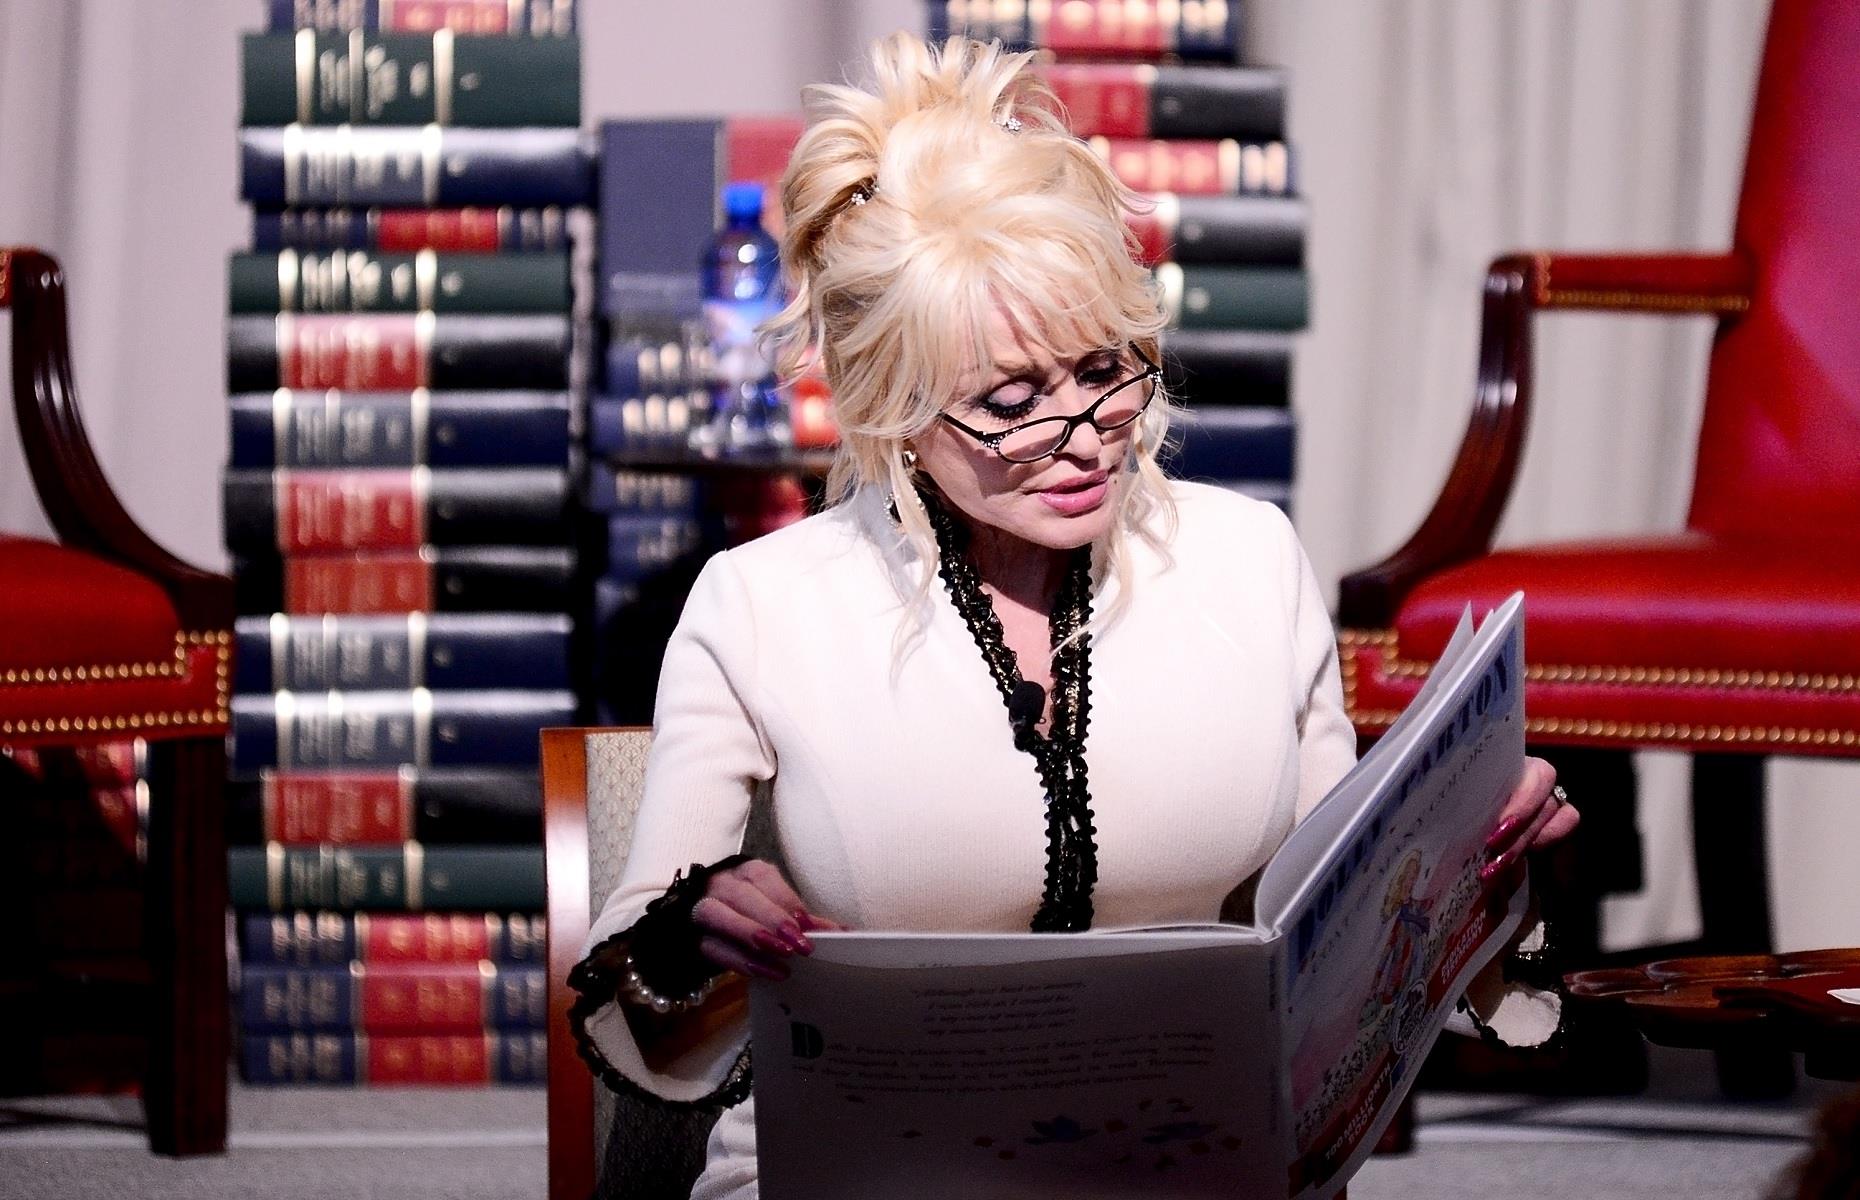 Dolly Parton has donated more than 150 million children's books